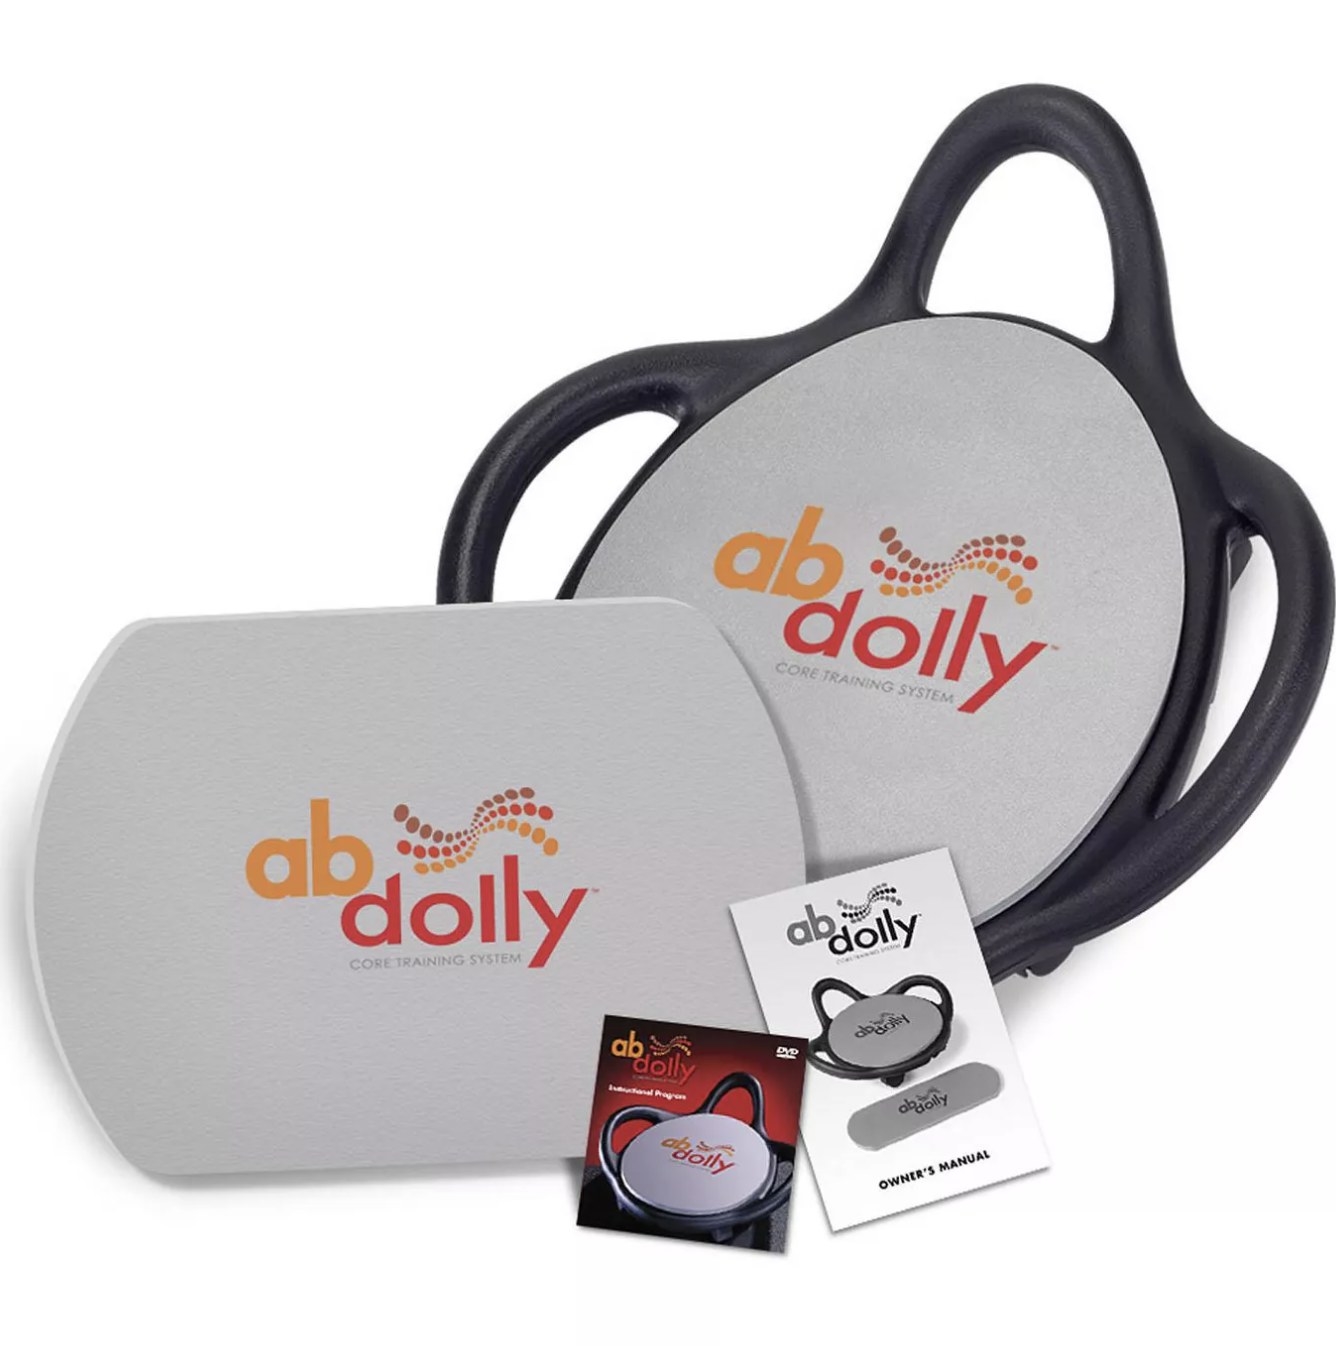 ABDolly abdominal exercise equipment next to a manual and DVD